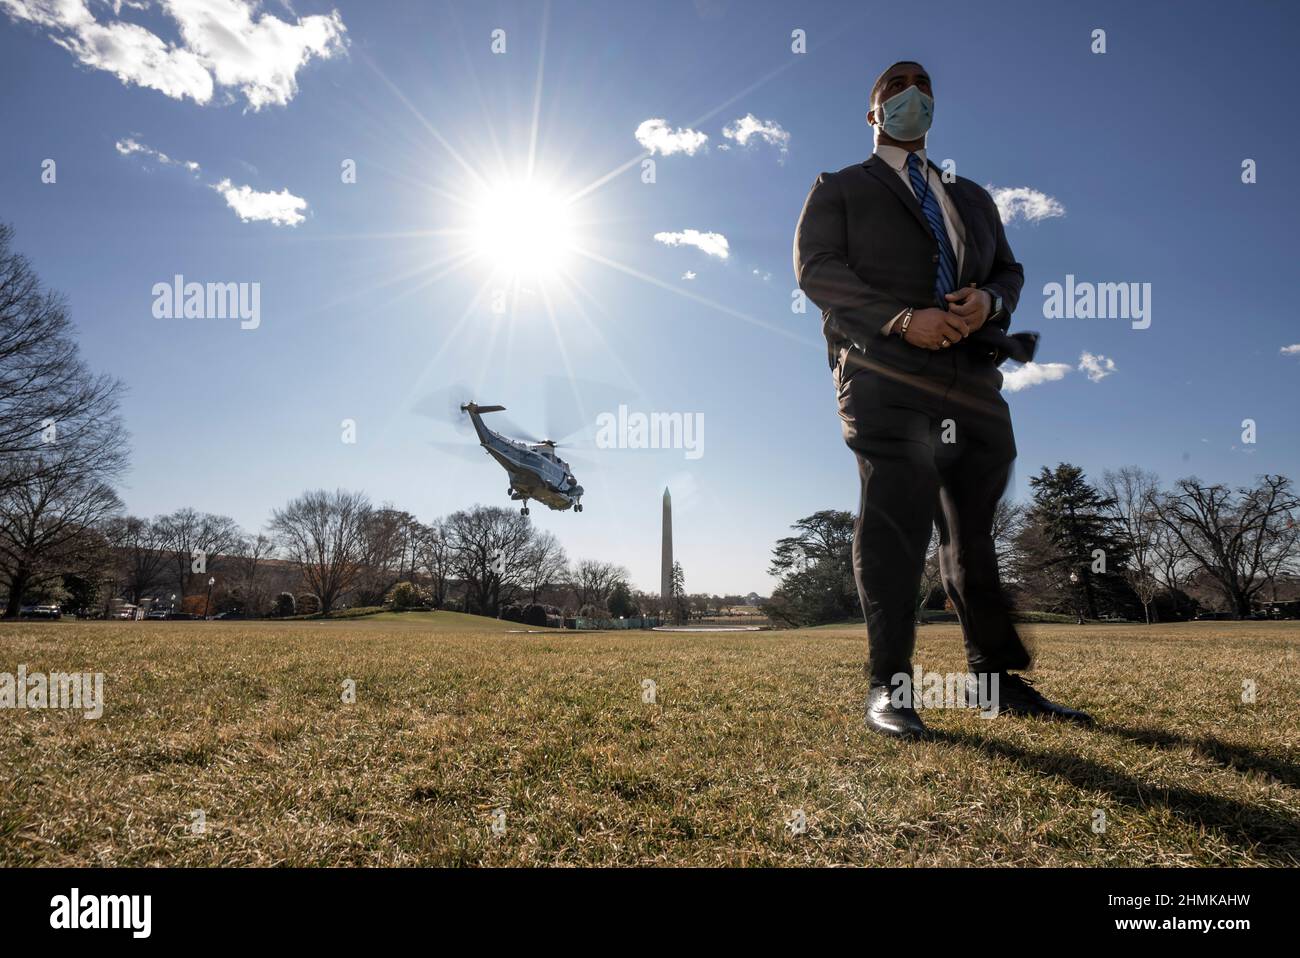 Marine One carrying the US President Joe Biden departs the White House en route to Culpeper Regional Airport in Virginia from the South Lawn at the White House in Washington, DC, U.S., February 10, 2021. Biden will deliver remarks highlighting the Biden-Harris Administrations work to lower health care costs, including prescription drug costs, for American families. Credit: Ken Cedeno/Pool via CNP Stock Photo